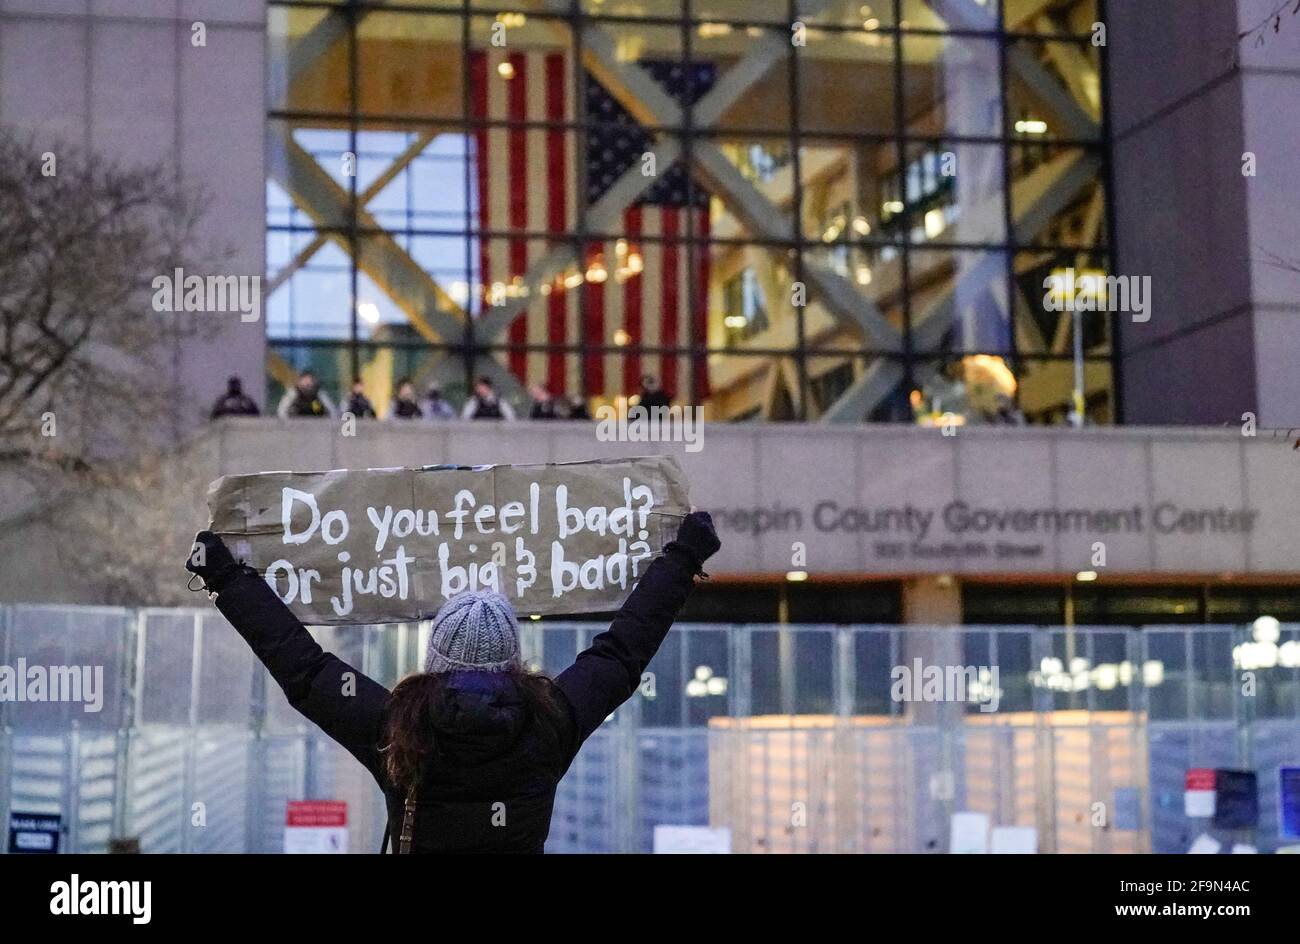 Sheridan Lair of Minneapolis, Minnesota holds up a sign as she protests in front of the site of the Derek Chauvin Murder Trial at the Hennepin County Government Center in Minneapolis, Minnesota on Monday, April 19, 2021. Earlier Protestors marched through downtown Minneapolis as jury deliberations begin in the Derek Chauvin trial in Minneapolis, Minnesota on Monday, April 19, 2021. Former police officer Derek Chauvin is charged with second-degree unintentional murder, third-degree murder and second-degree manslaughter in the death of George Floyd. Photo by Jemal Countess/UPI Stock Photo